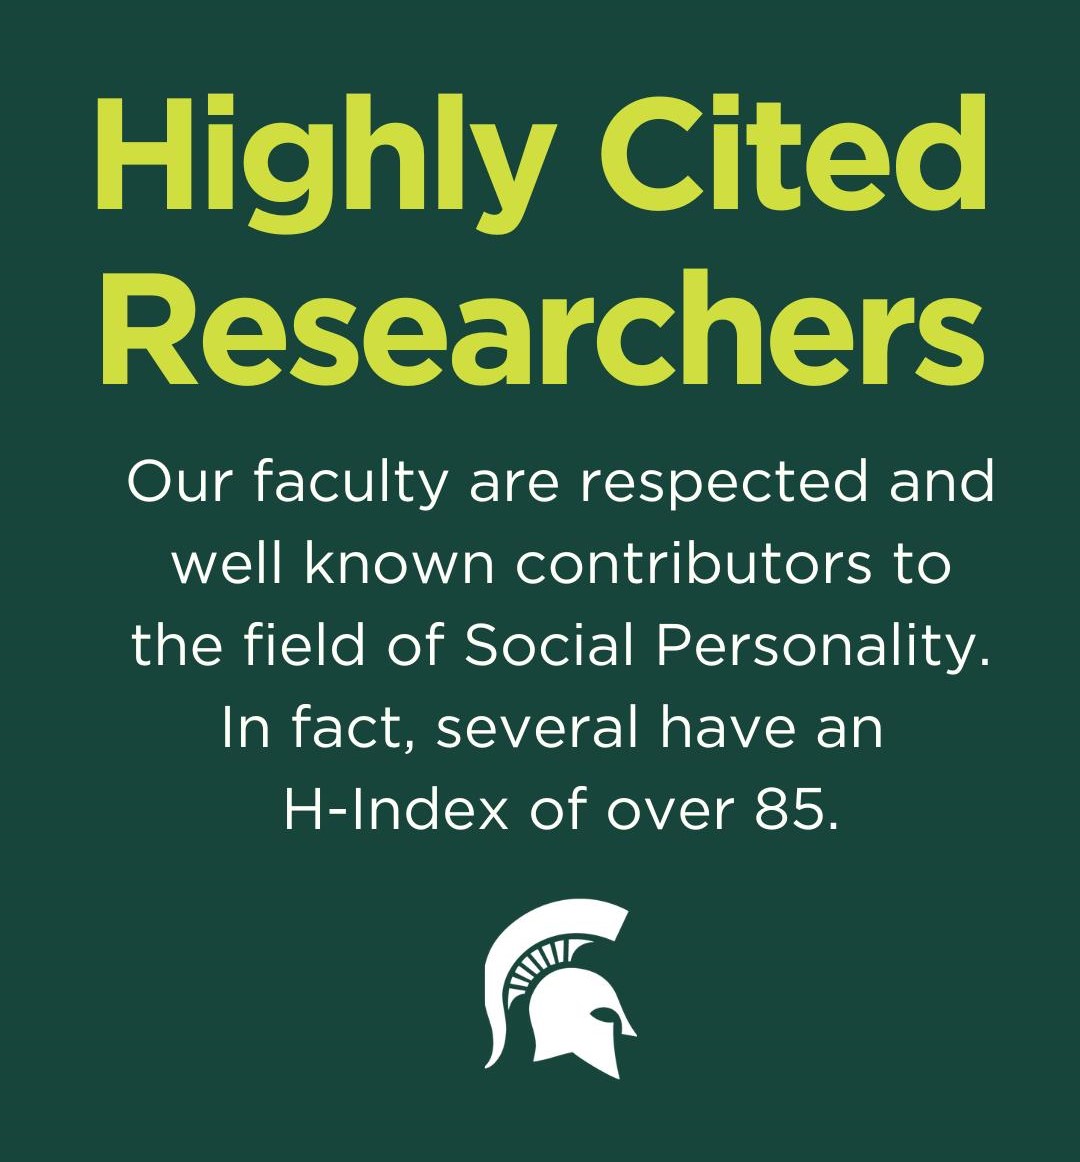 Highly cited researchers: our faculty are respected and well known contributors to the field of Social Personality. In fact, several have an H-Index of over 85.